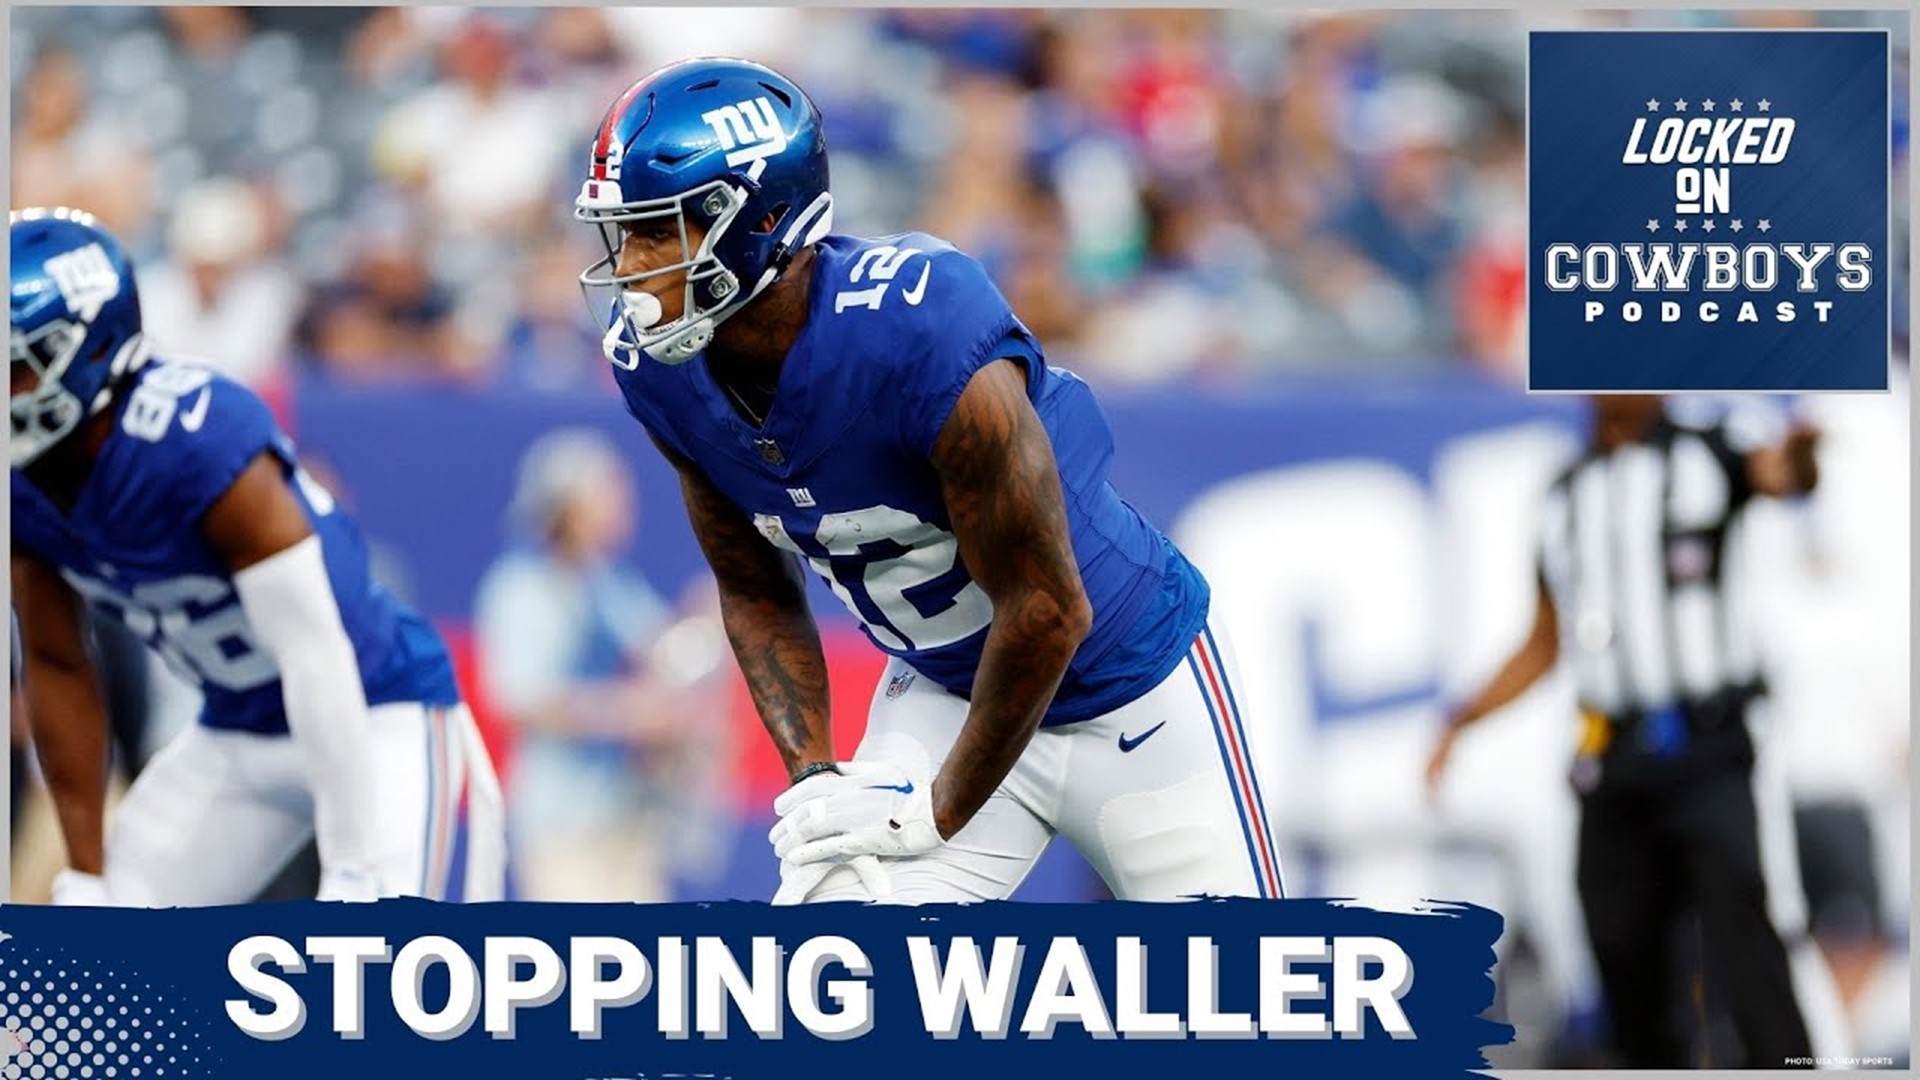 The New York Giants have added Pro Bowl TE Darren Waller to their passing attack this offseason. How will the Dallas Cowboys try to stop him on Sunday Night Football